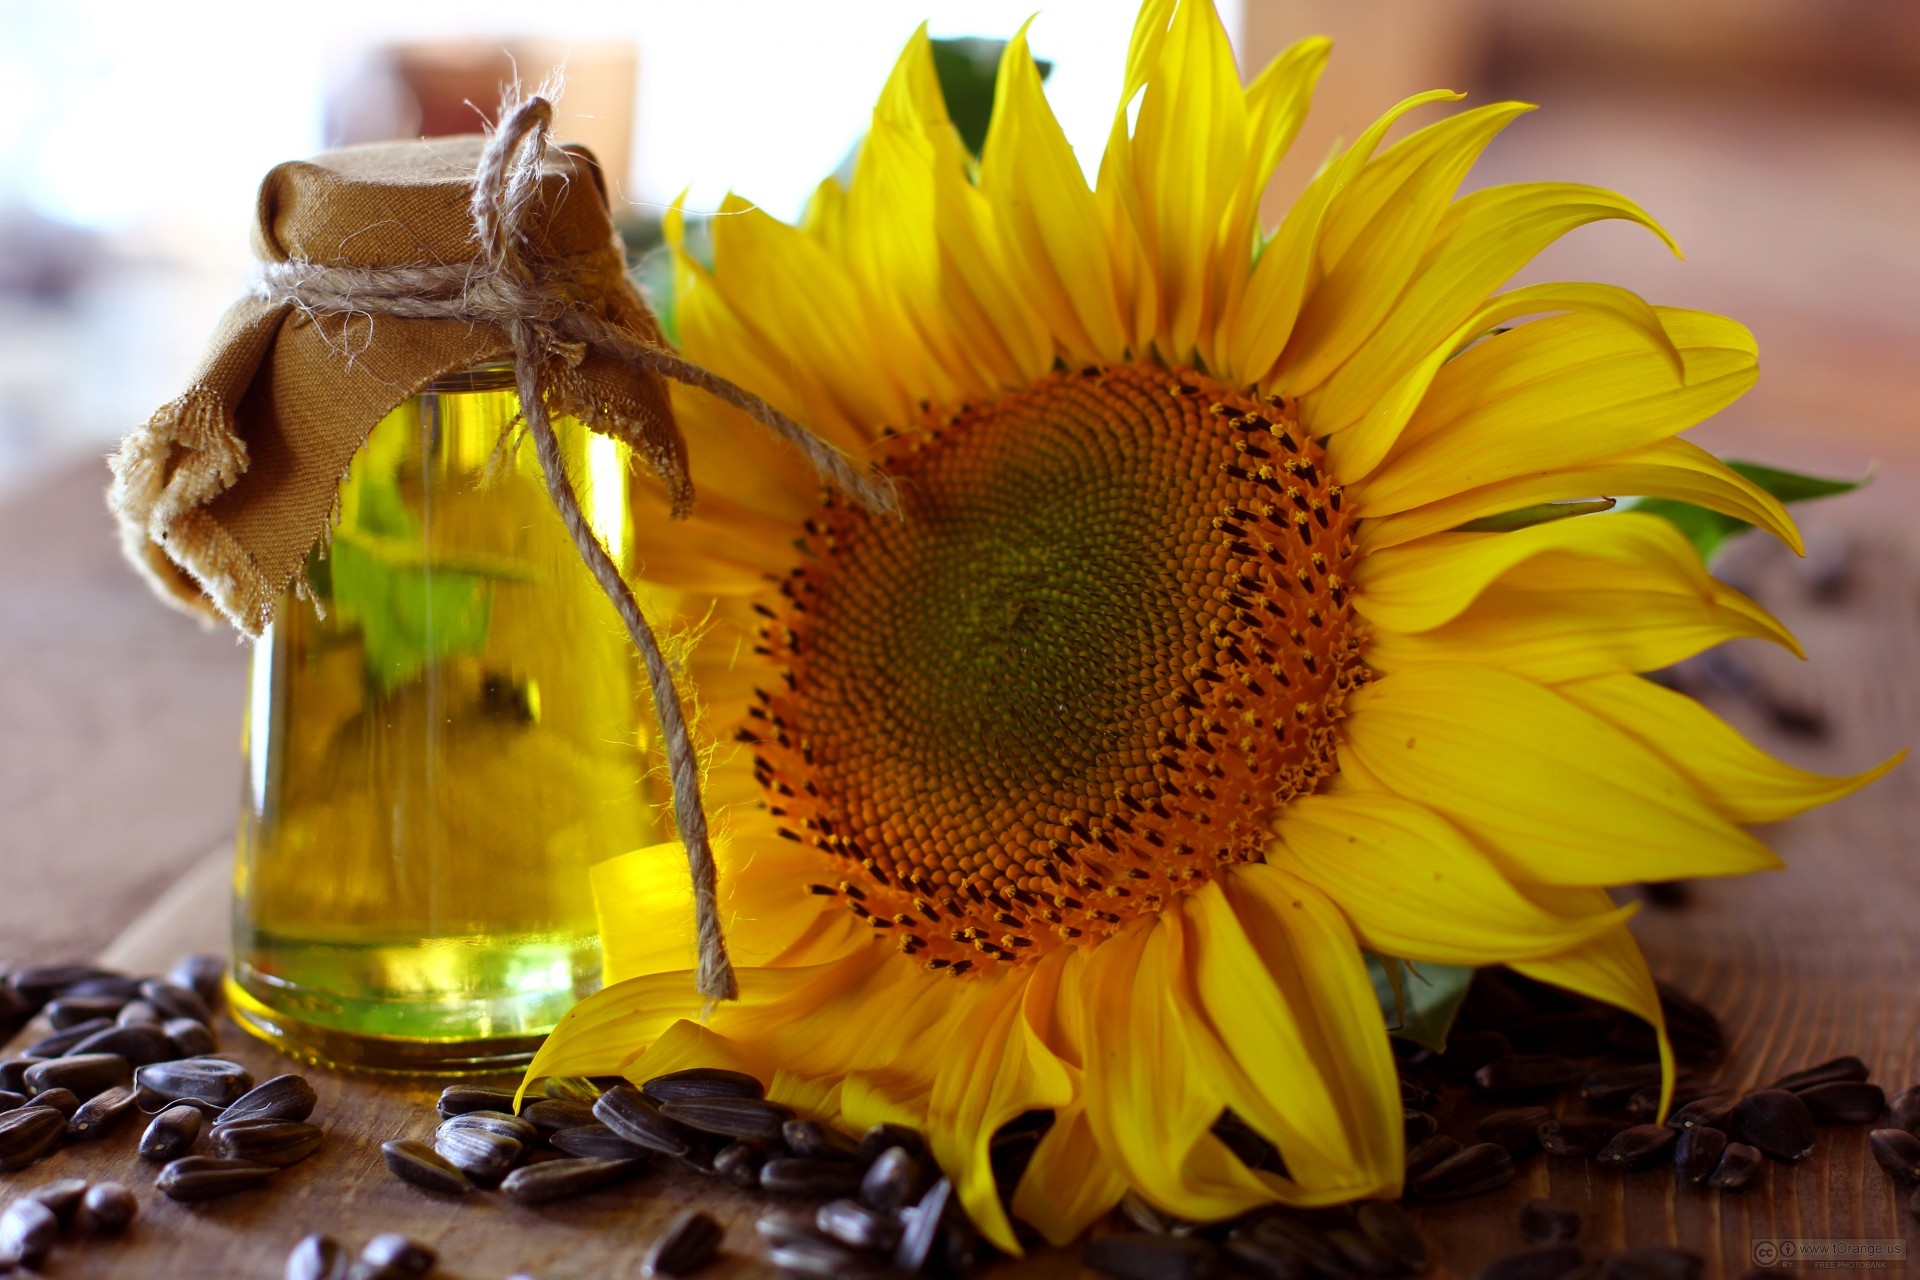 The price of sunflower oil, falling behind the market of palm oil